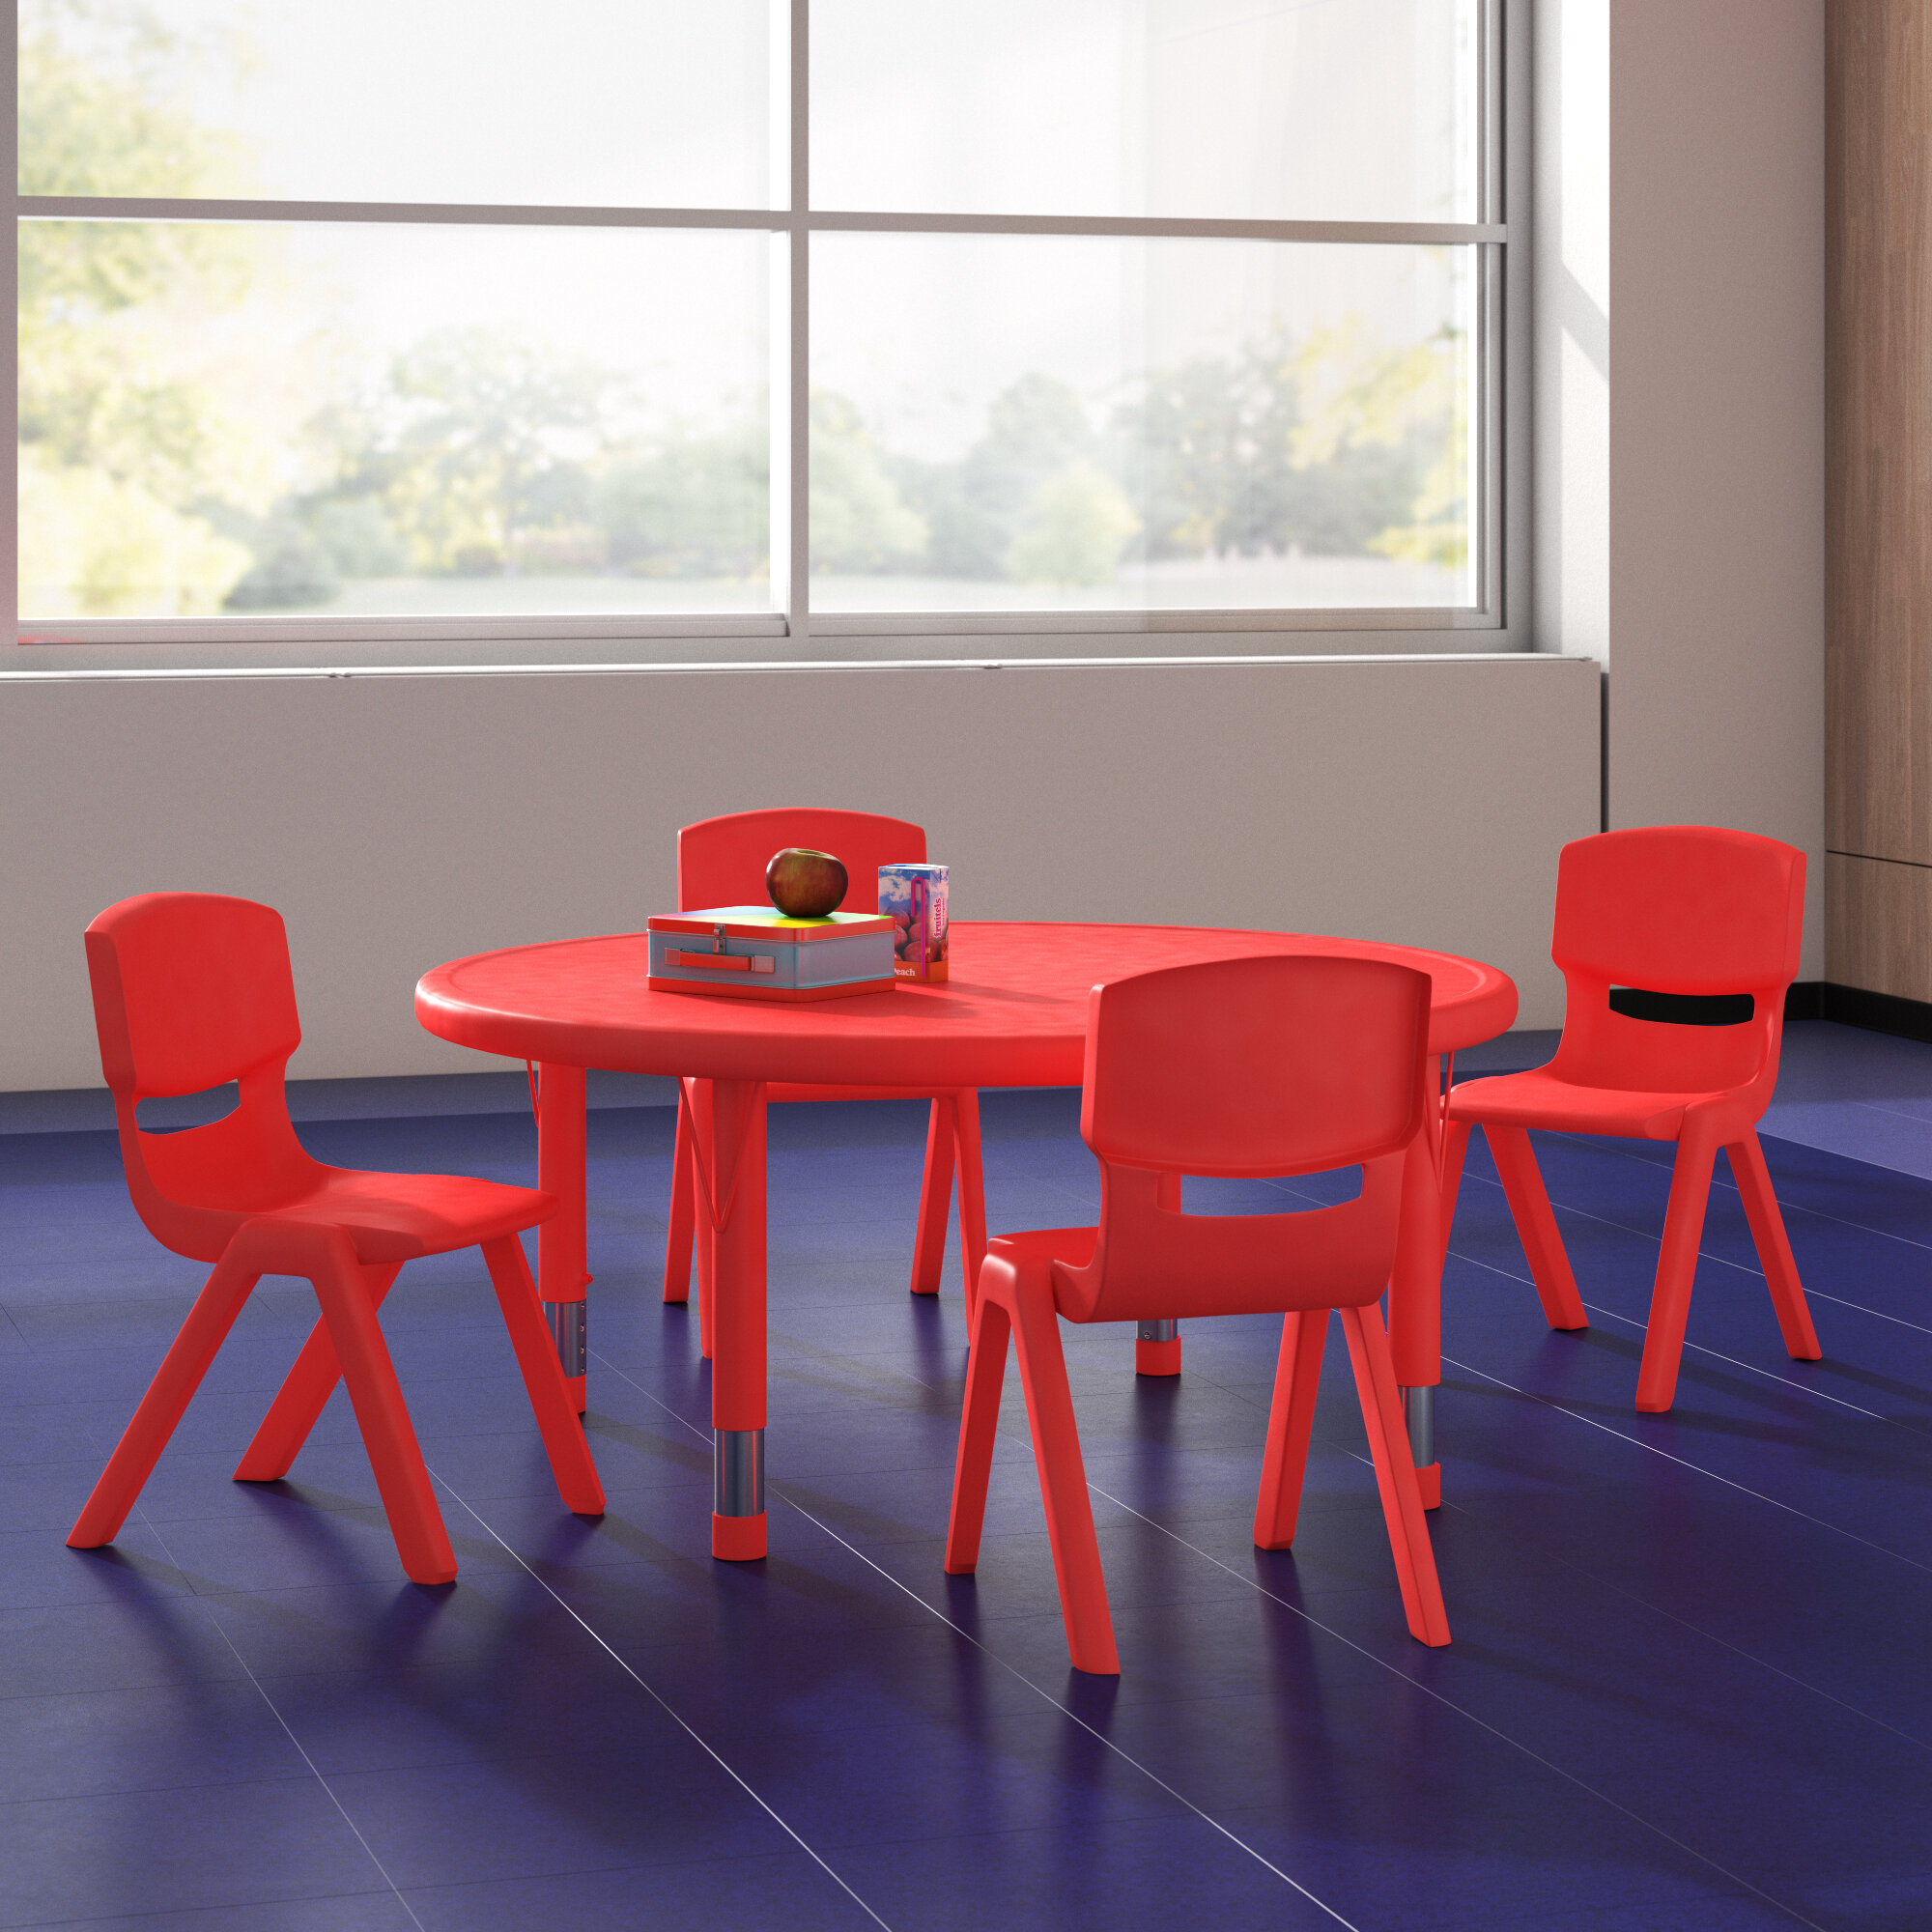 33" Round Adjustable Red Plastic Activity Table Set w/4 School Stack Chairs NEW 